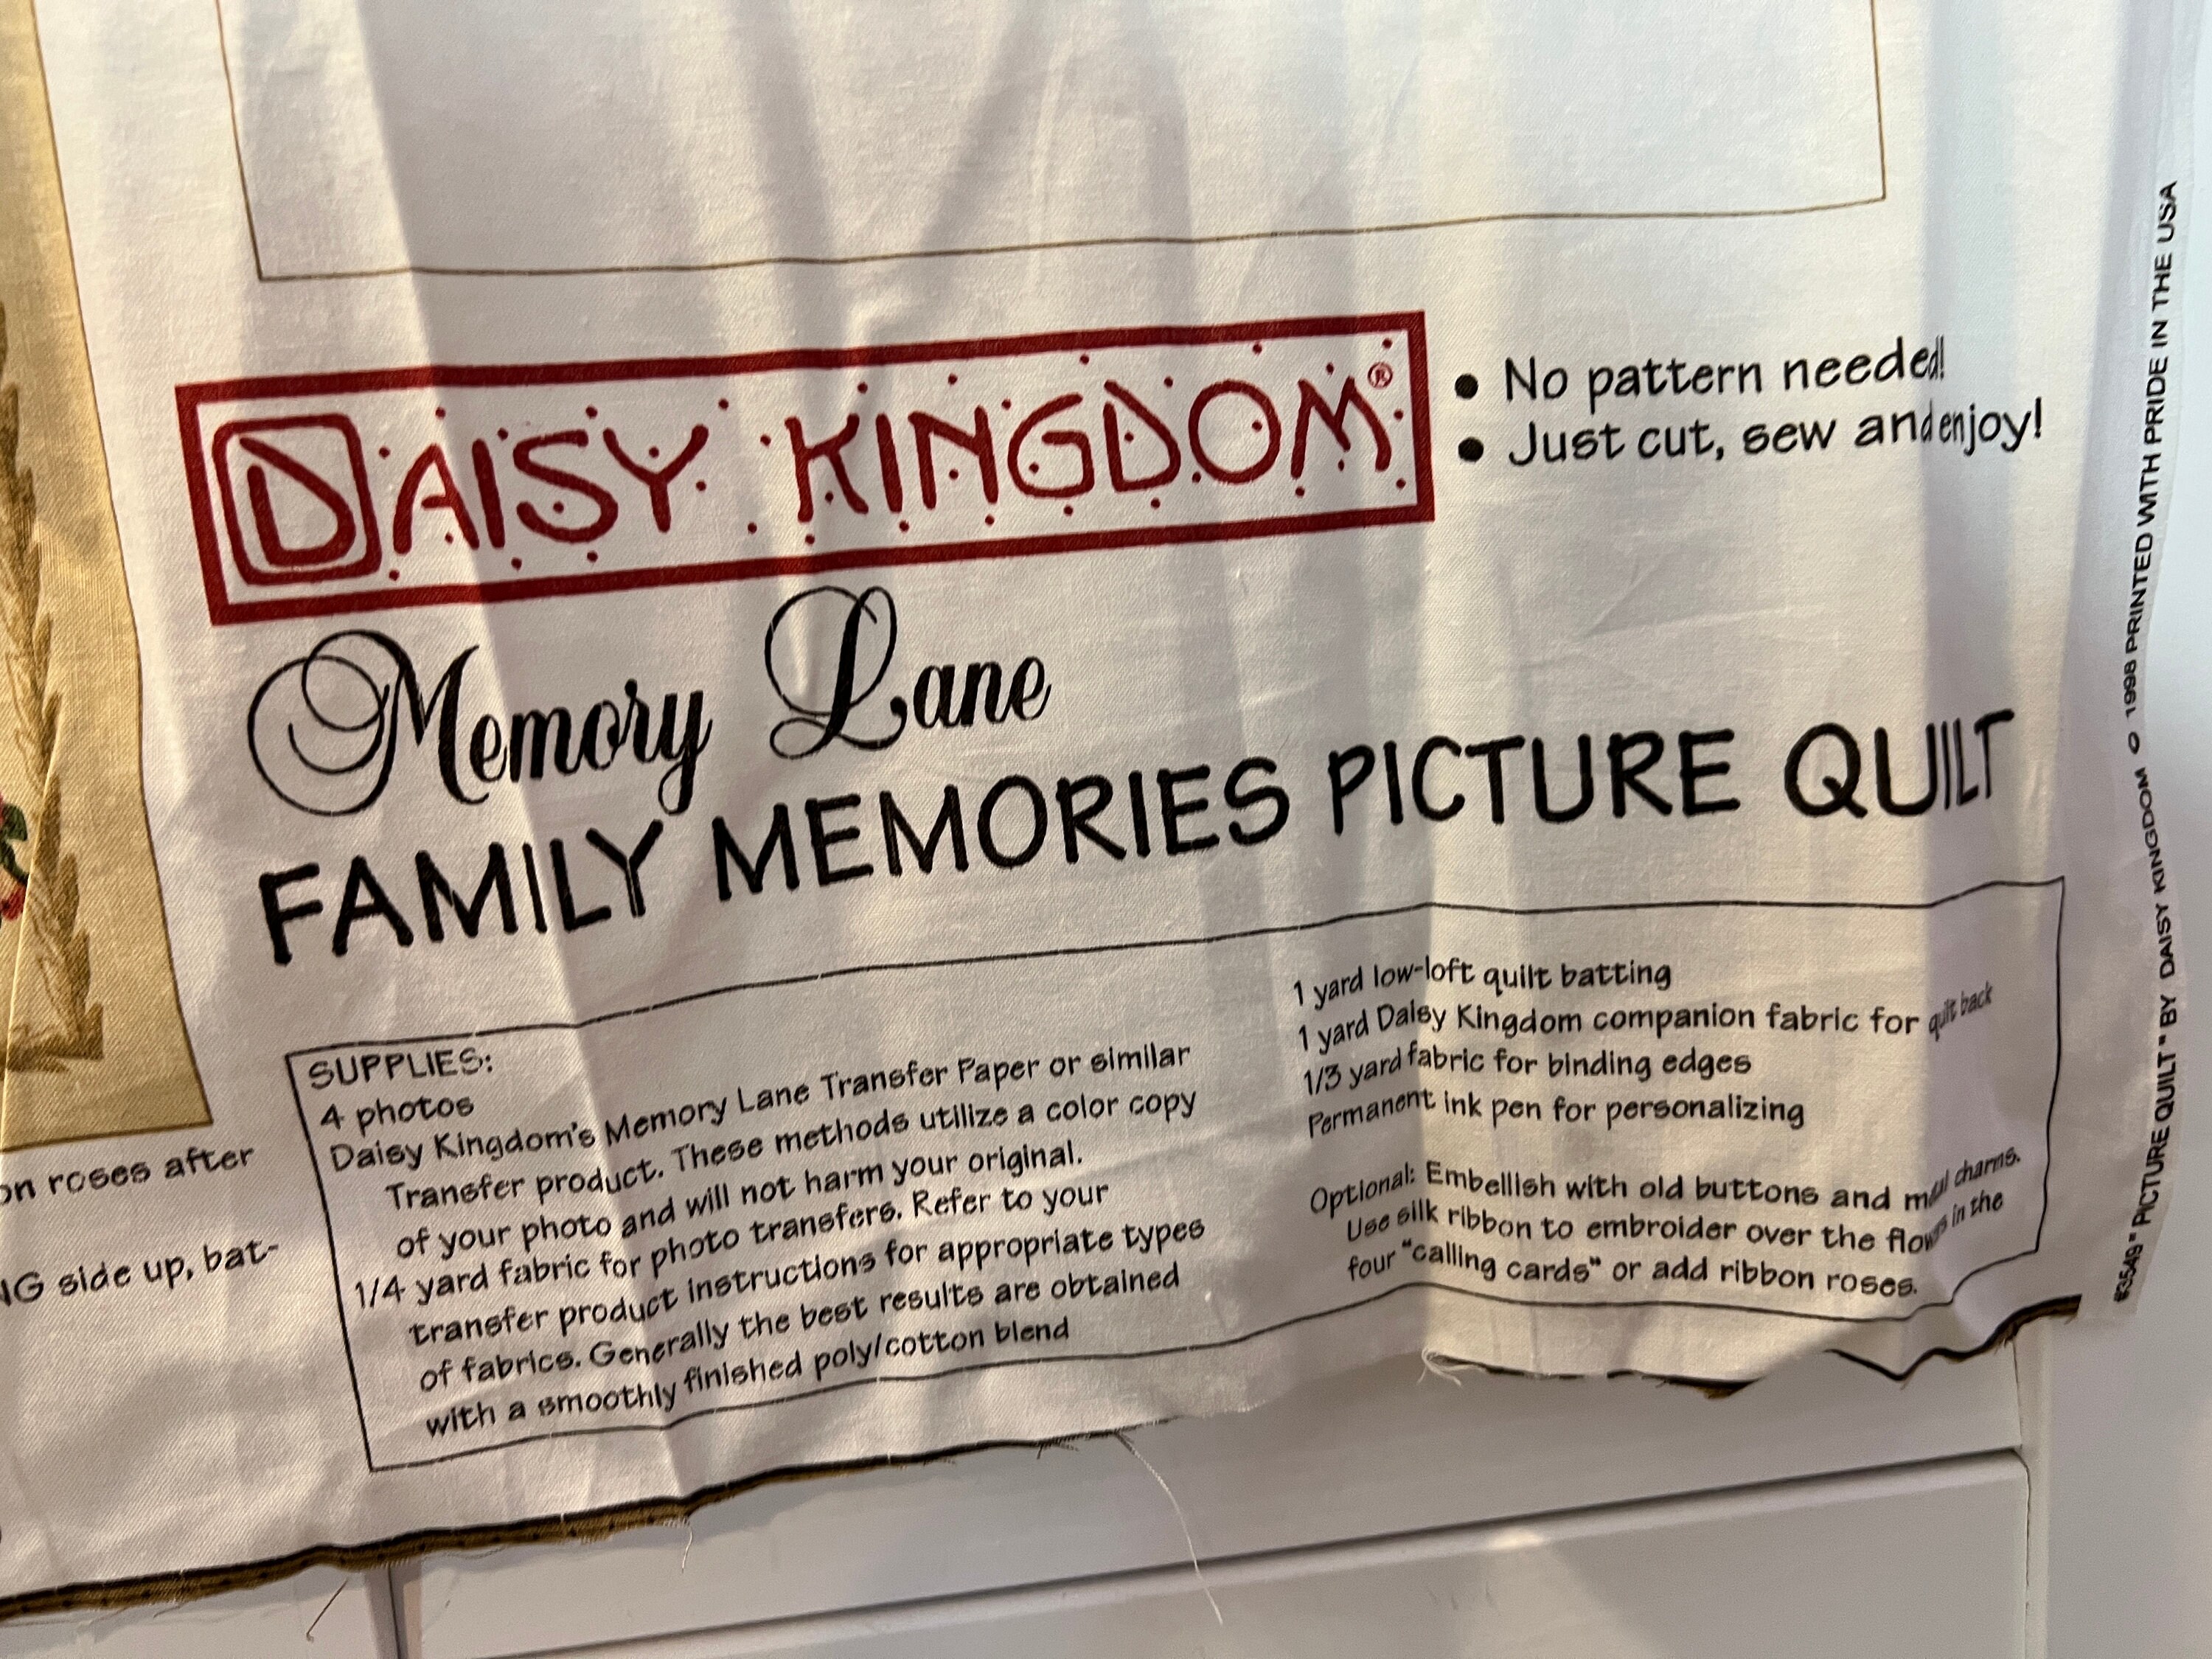 2 Daisy Kingdom MEMORY LANE PICTURE QUILT FAMILY TREE FABRIC PANEL 